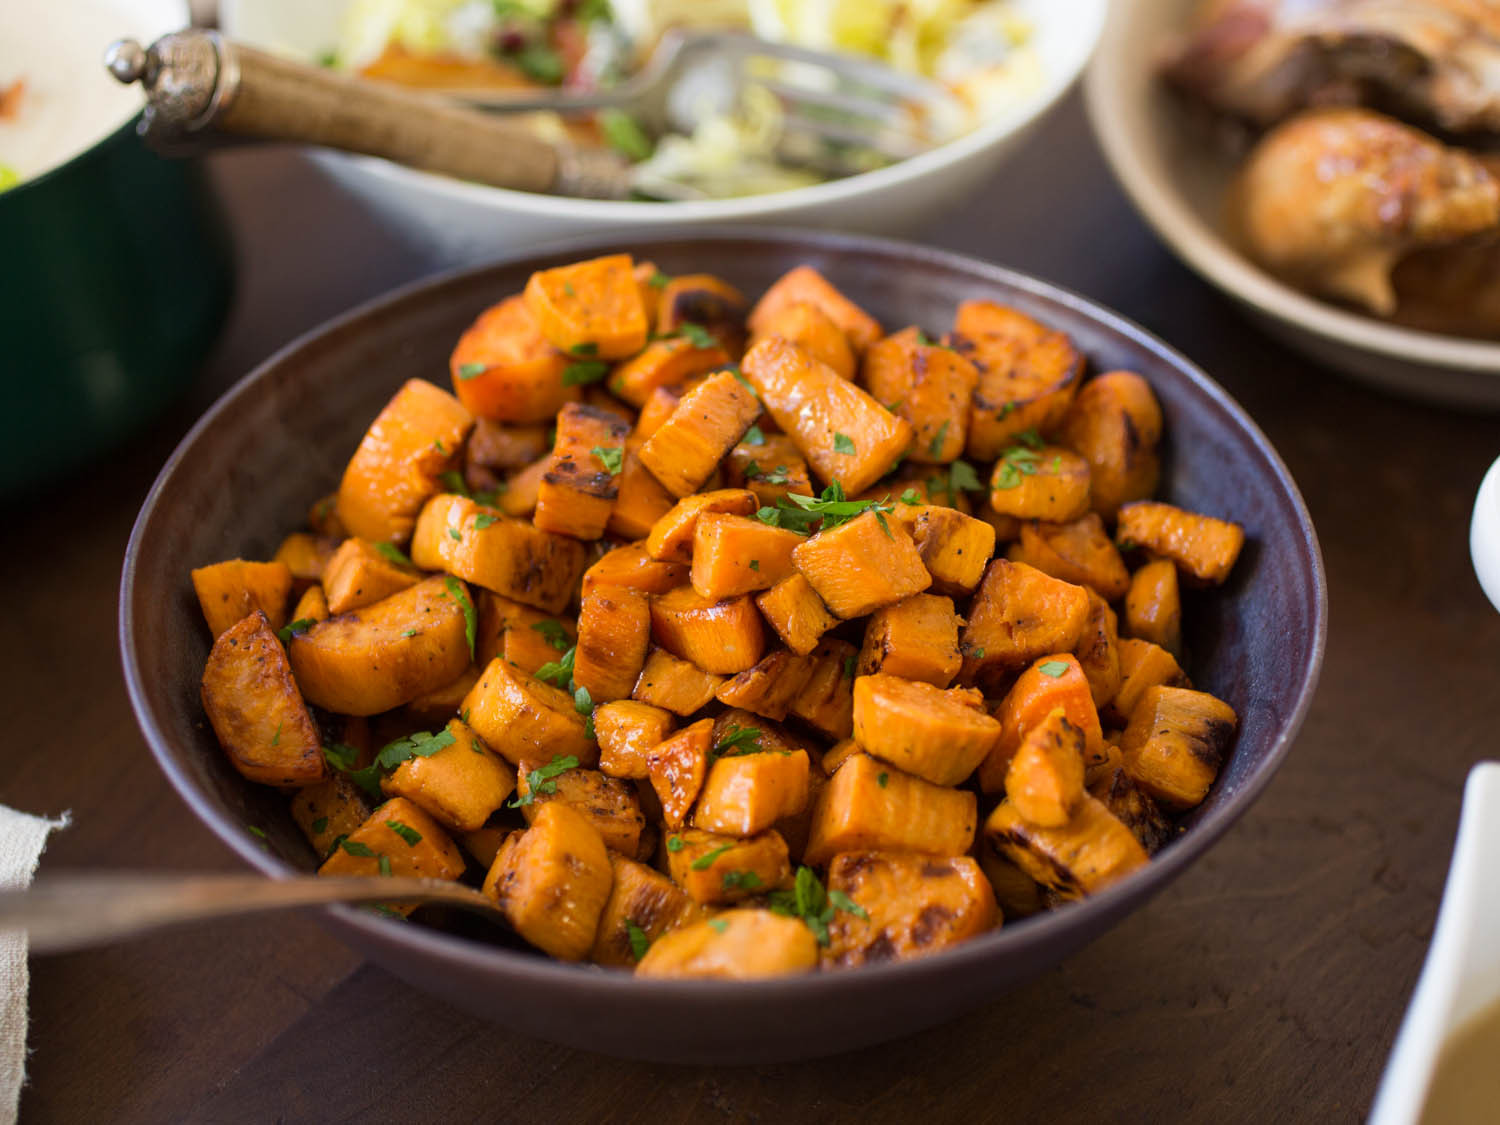 Sweet Potato Recipe For Thanksgiving
 8 Not Too Sweet Sweet Potato Recipes for Thanksgiving